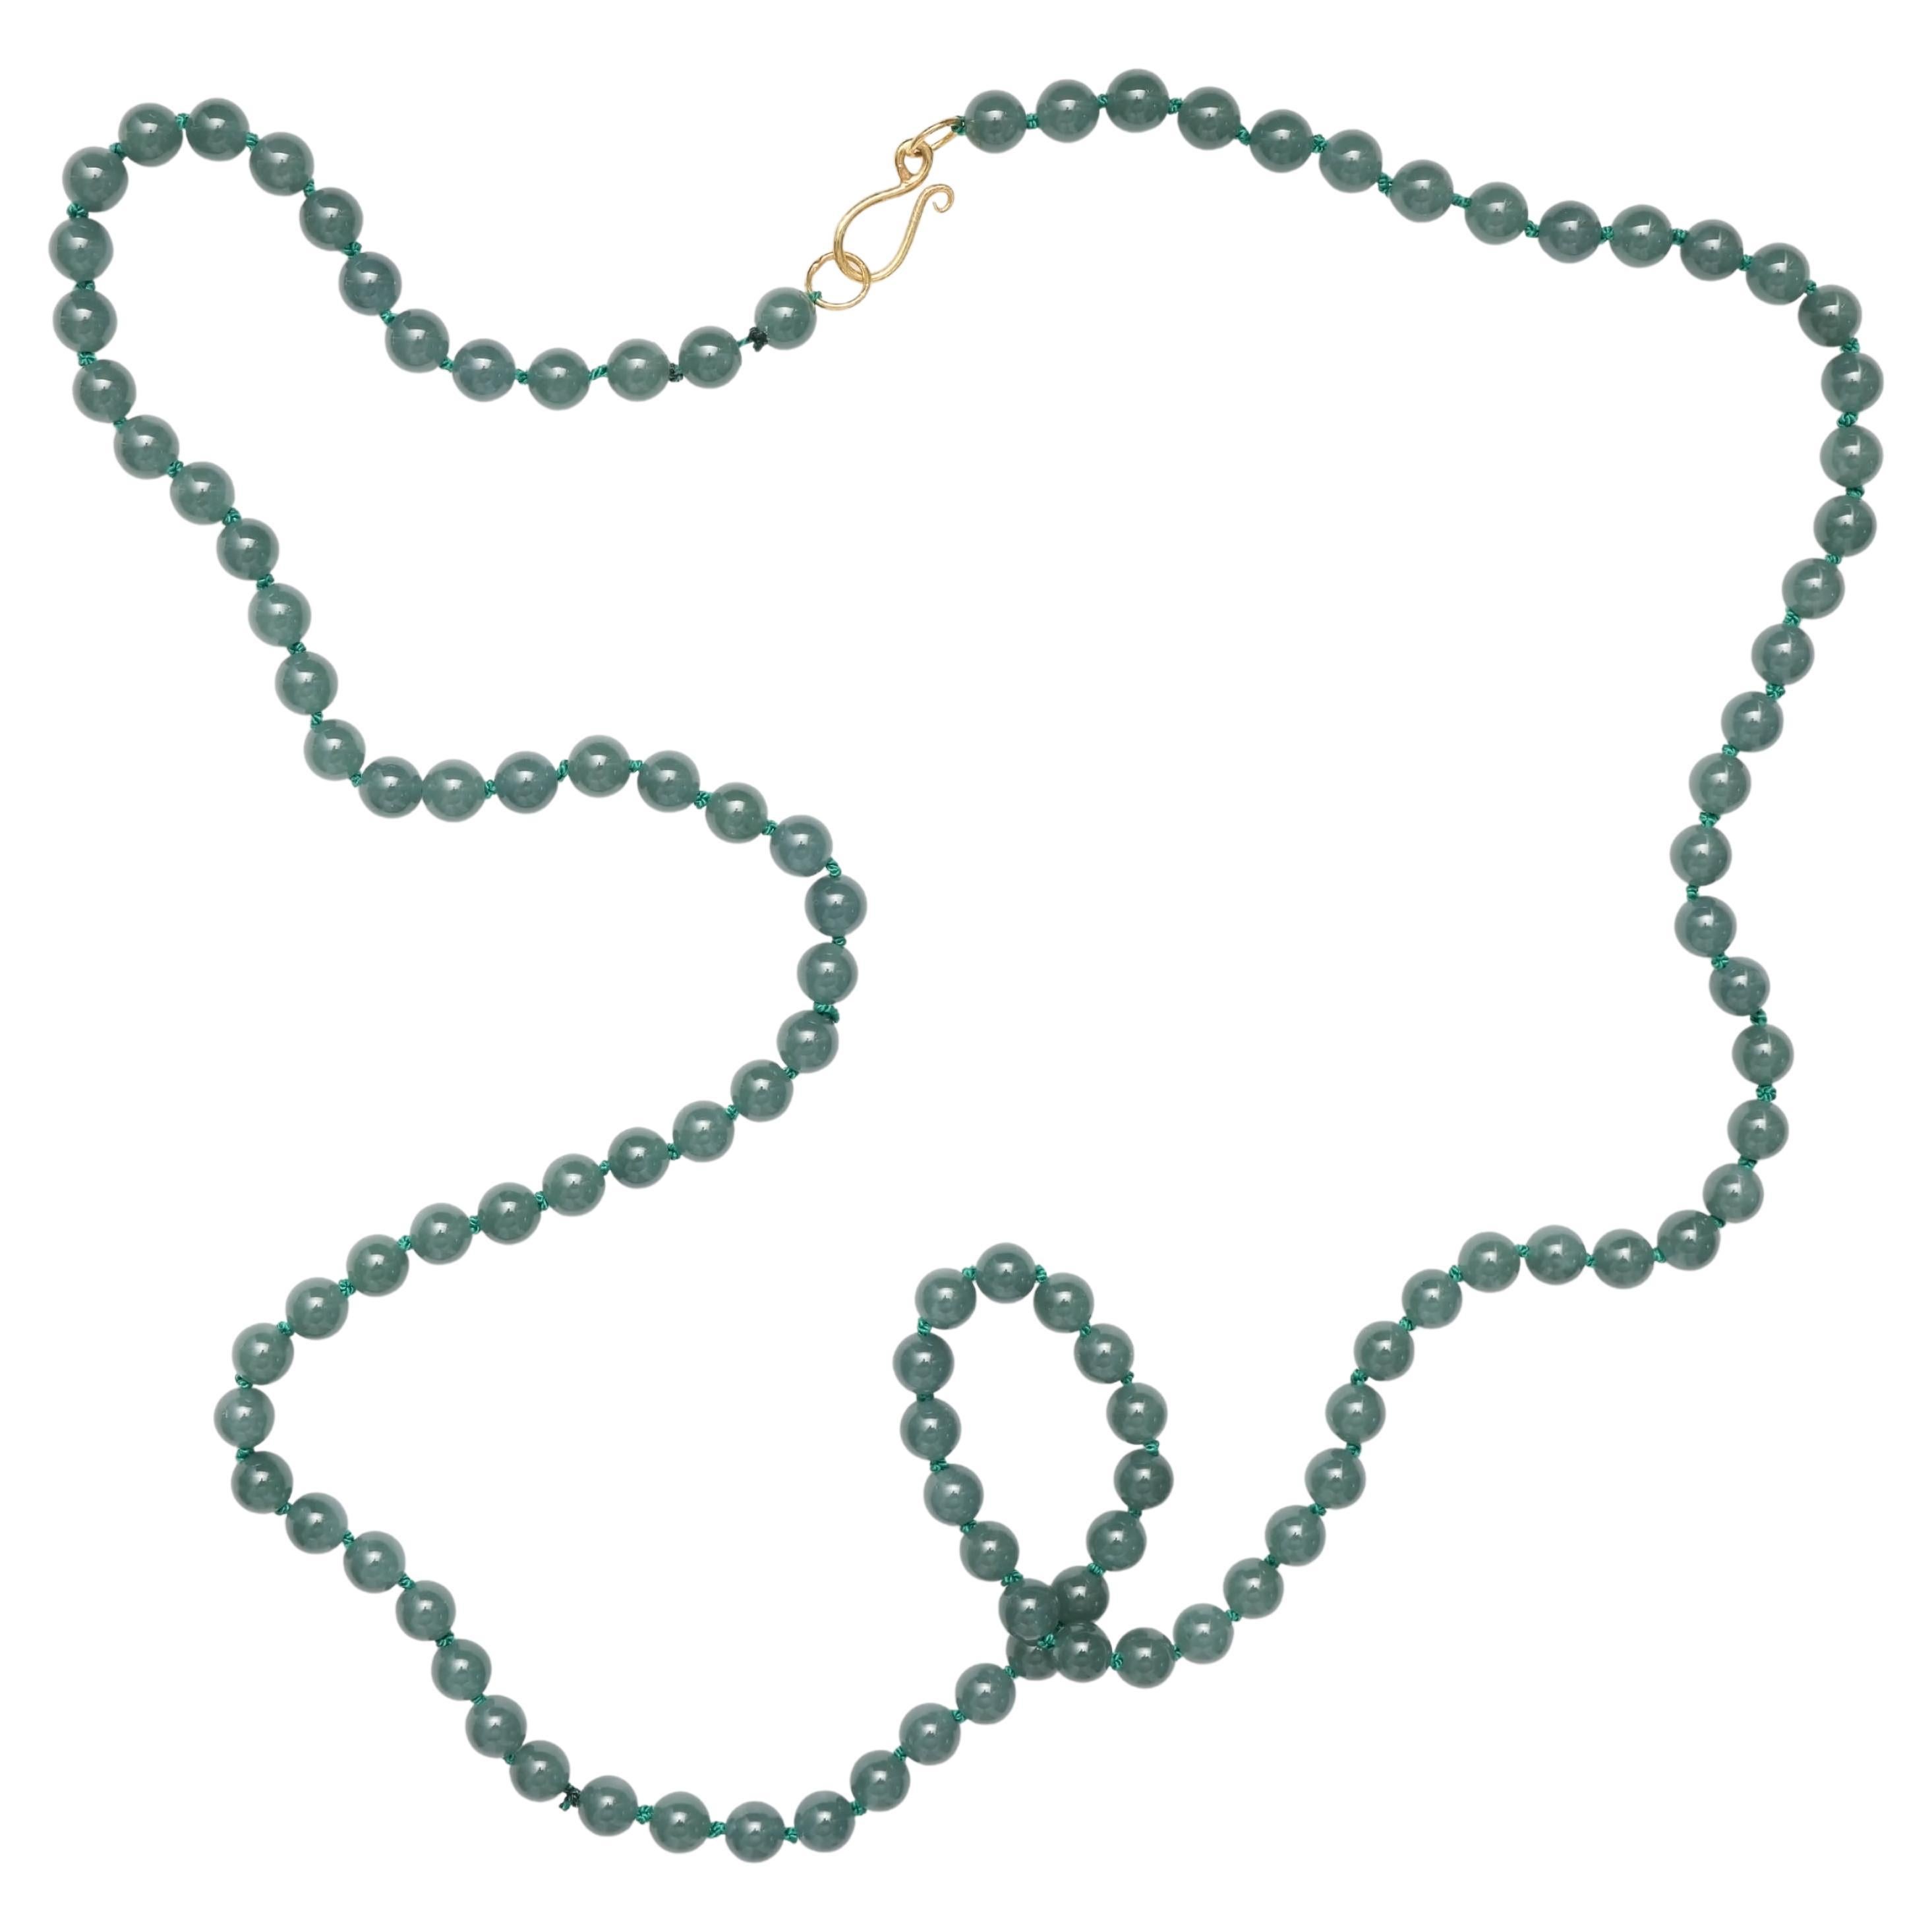 Jade Bead Necklace Translucent Bluish Green Certified For Sale